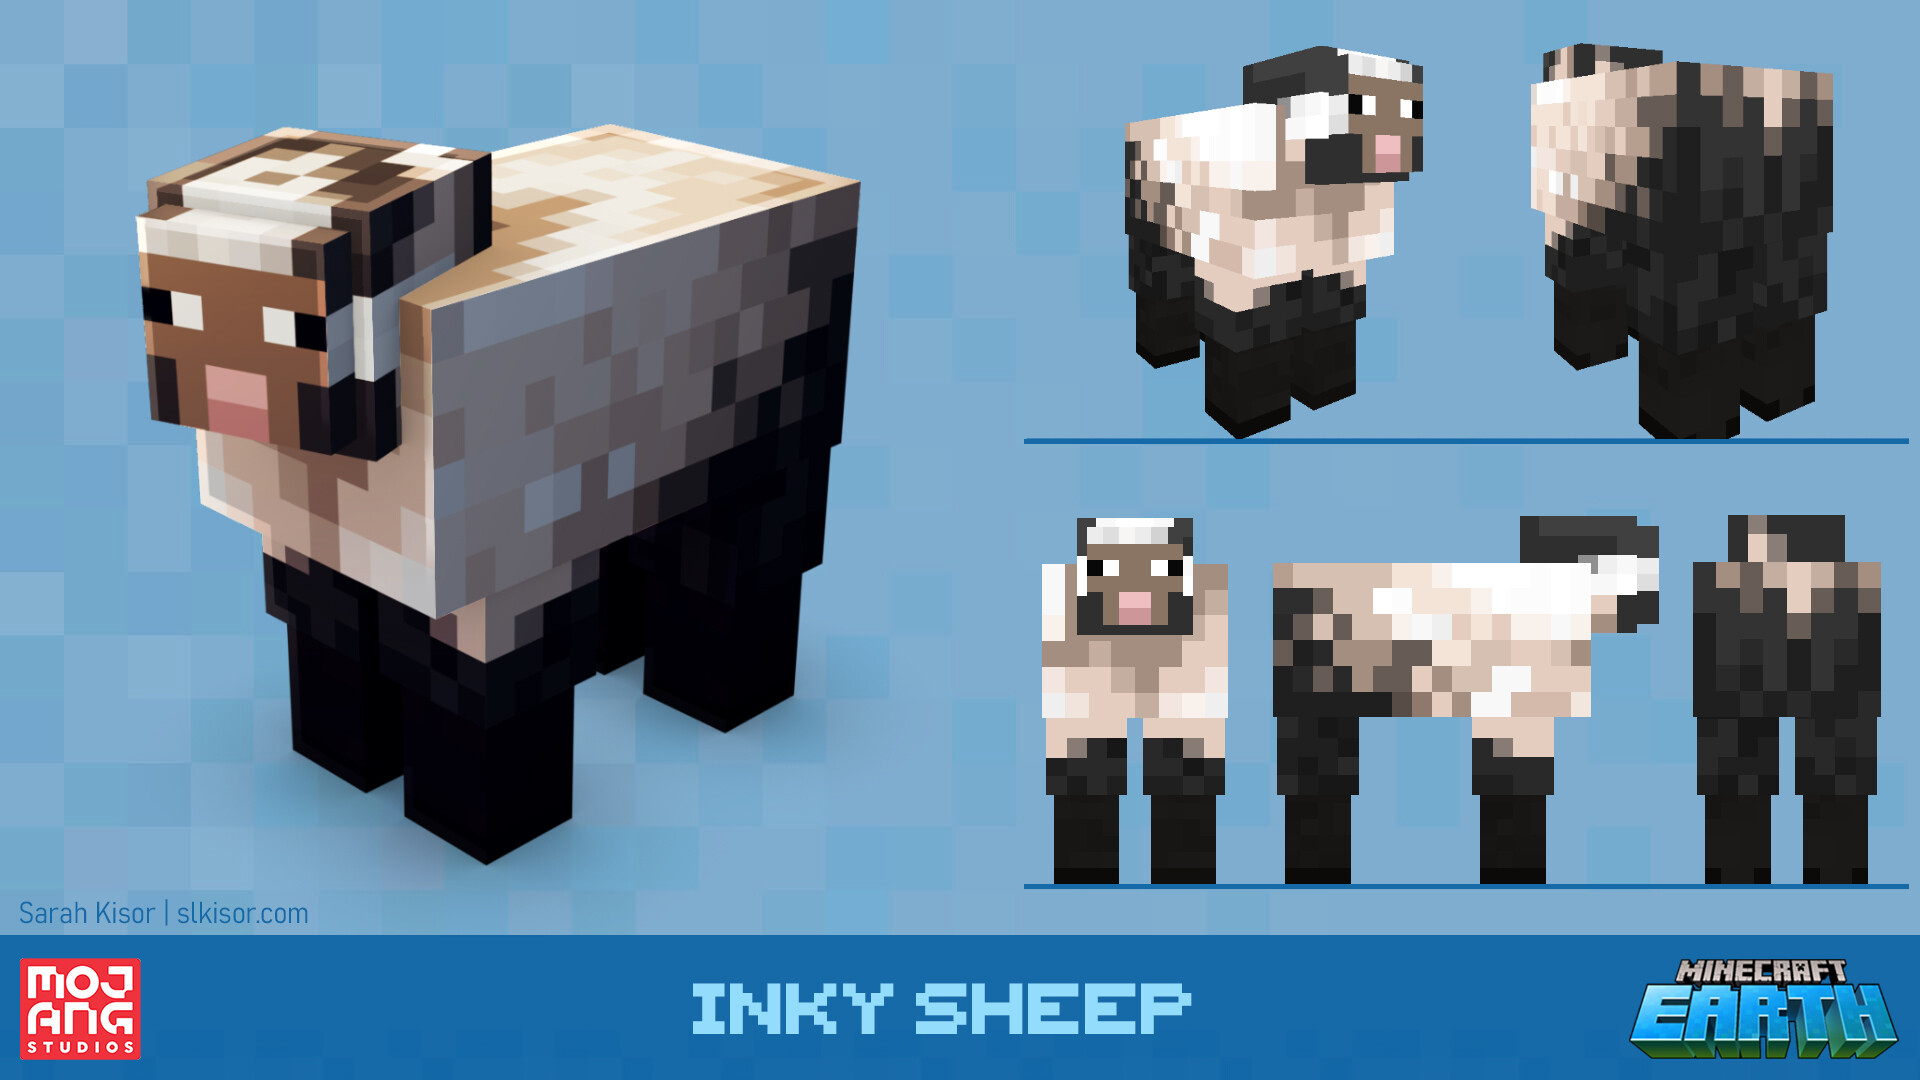 Minecraft Earth update: Patched Sheep and Season 11